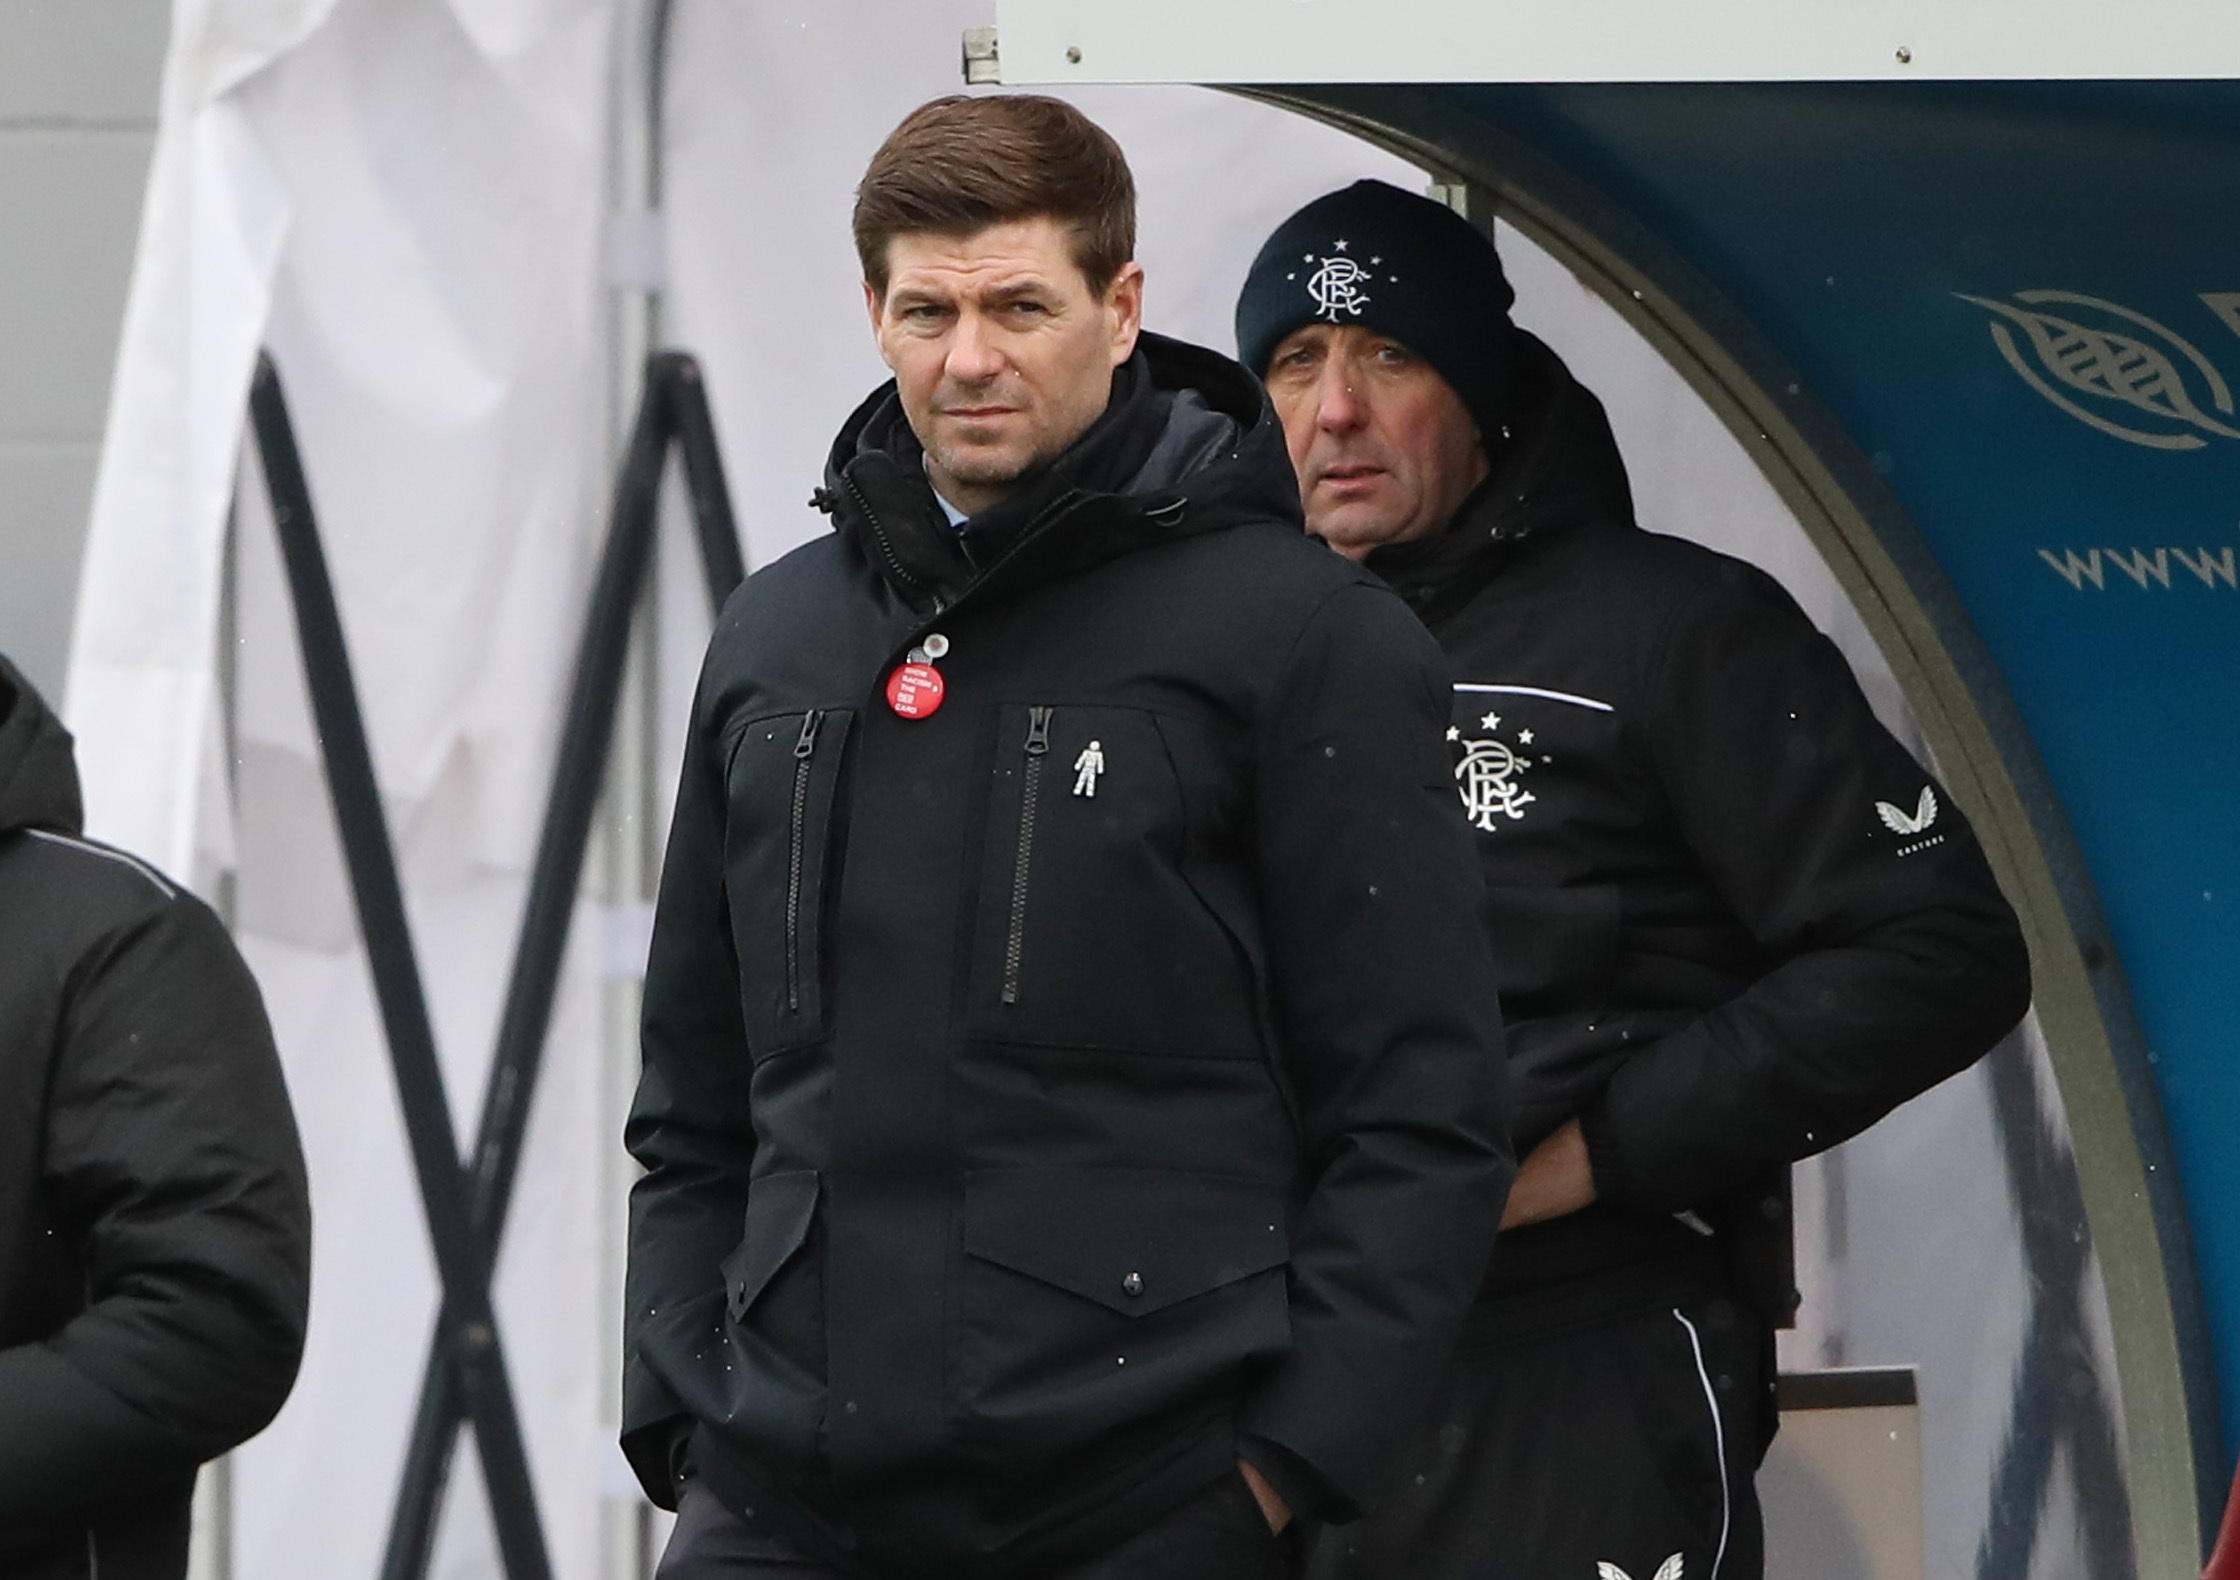 Rangers boss Steven Gerrard's 'worst performance of the season' admission after Accies draw